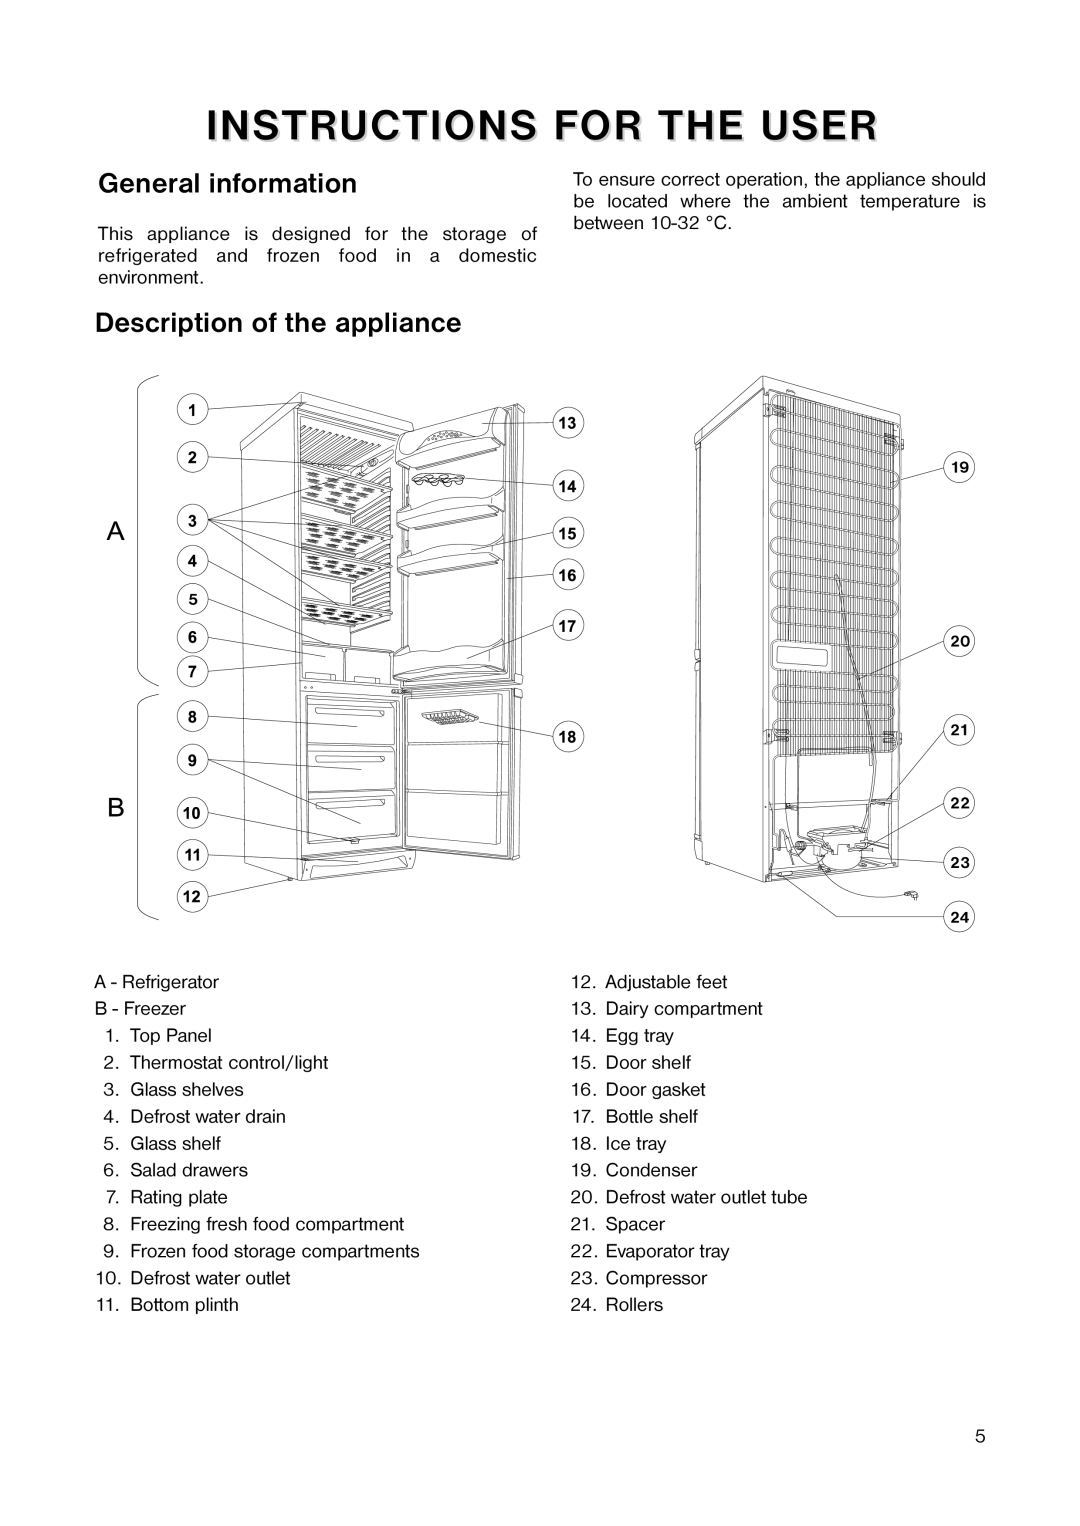 Zanussi ZEBF 351 W manual Instructions For The User, General information, Description of the appliance 